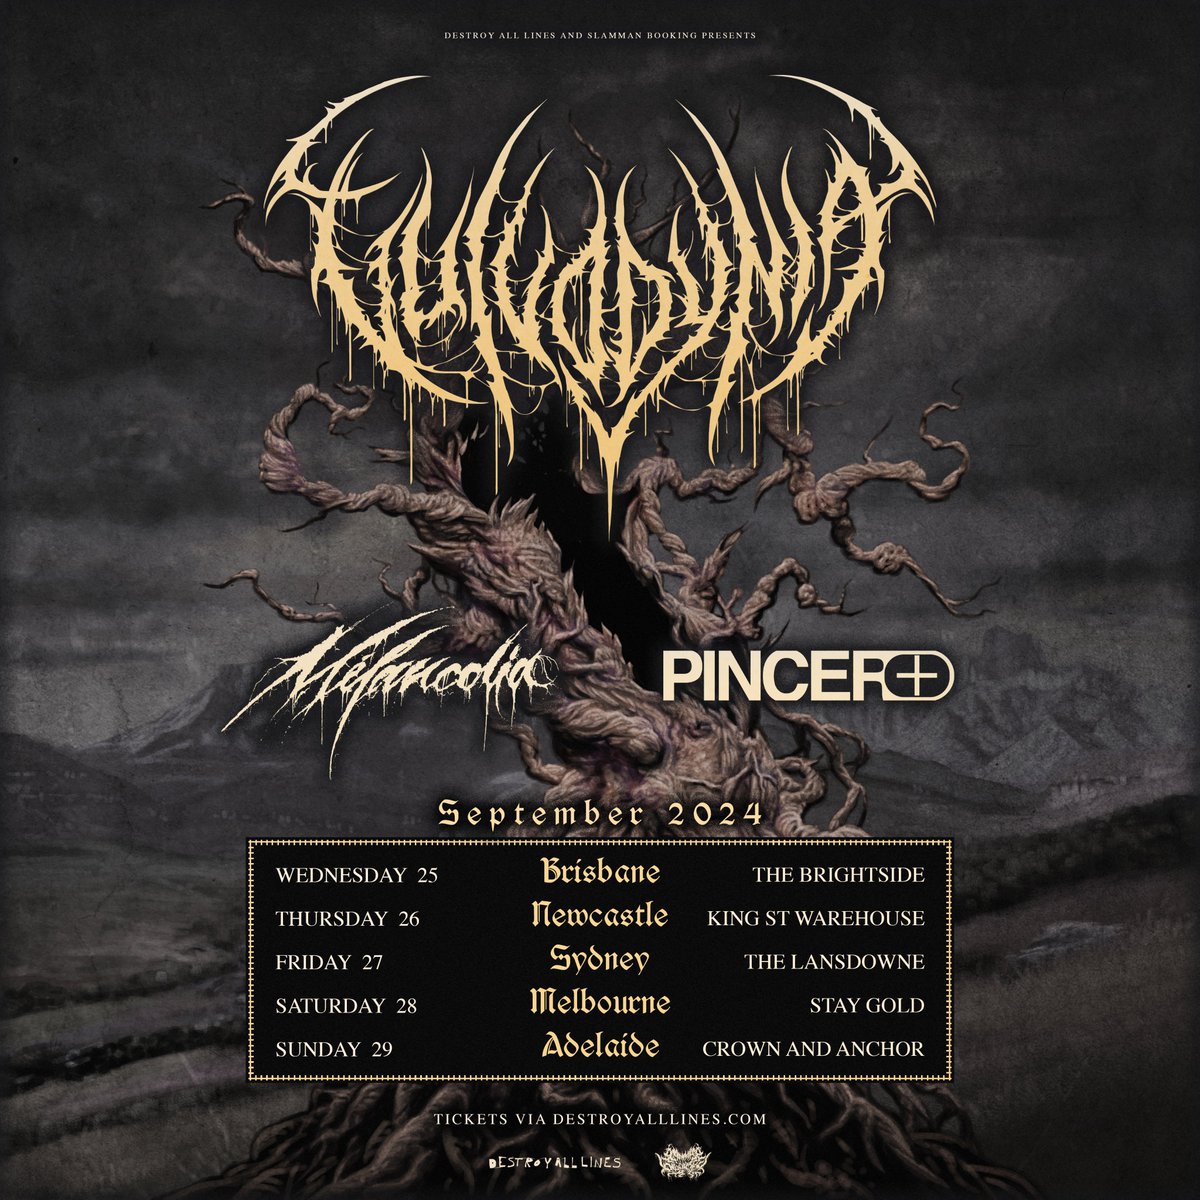 South African brutal death metal unit @VulvodyniaSlam return to Australia in September with @melancolia_exe and Pincer+. Early Bird Presale: Wed 8 May @ 12 PM 𝙇𝙊𝘾𝘼𝙇 Sign up for Presale ➟ daltours.cc/vulvodynia General public on-sale: Fri 10 May @ 12 PM 𝙇𝙊𝘾𝘼𝙇